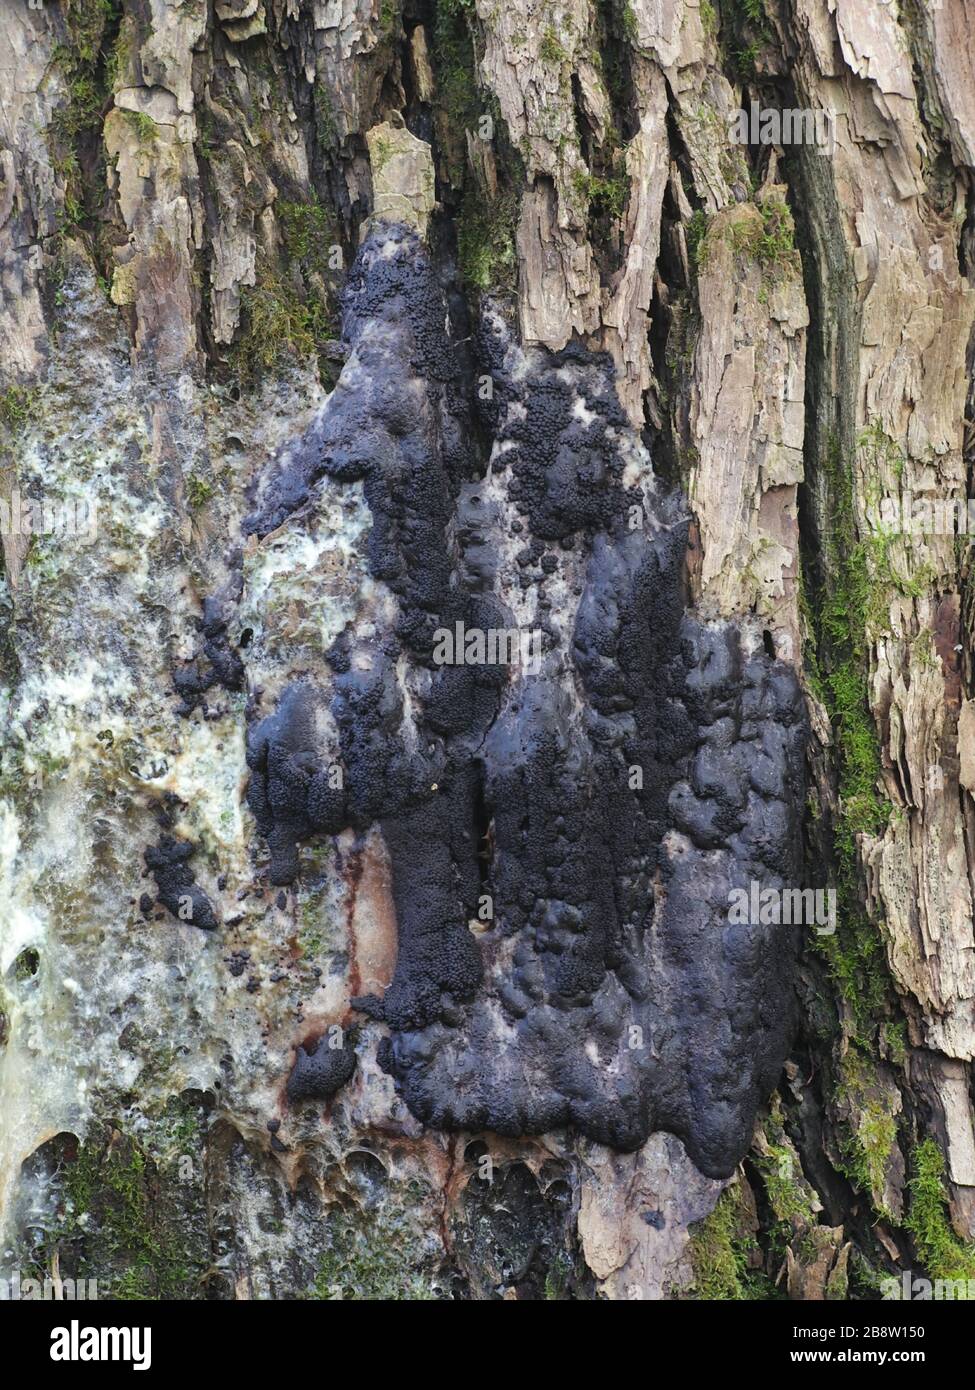 Brefeldia maxima, a species of non-parasitic plasmodial slime mold, commonly known as the tapioca slime mold Stock Photo